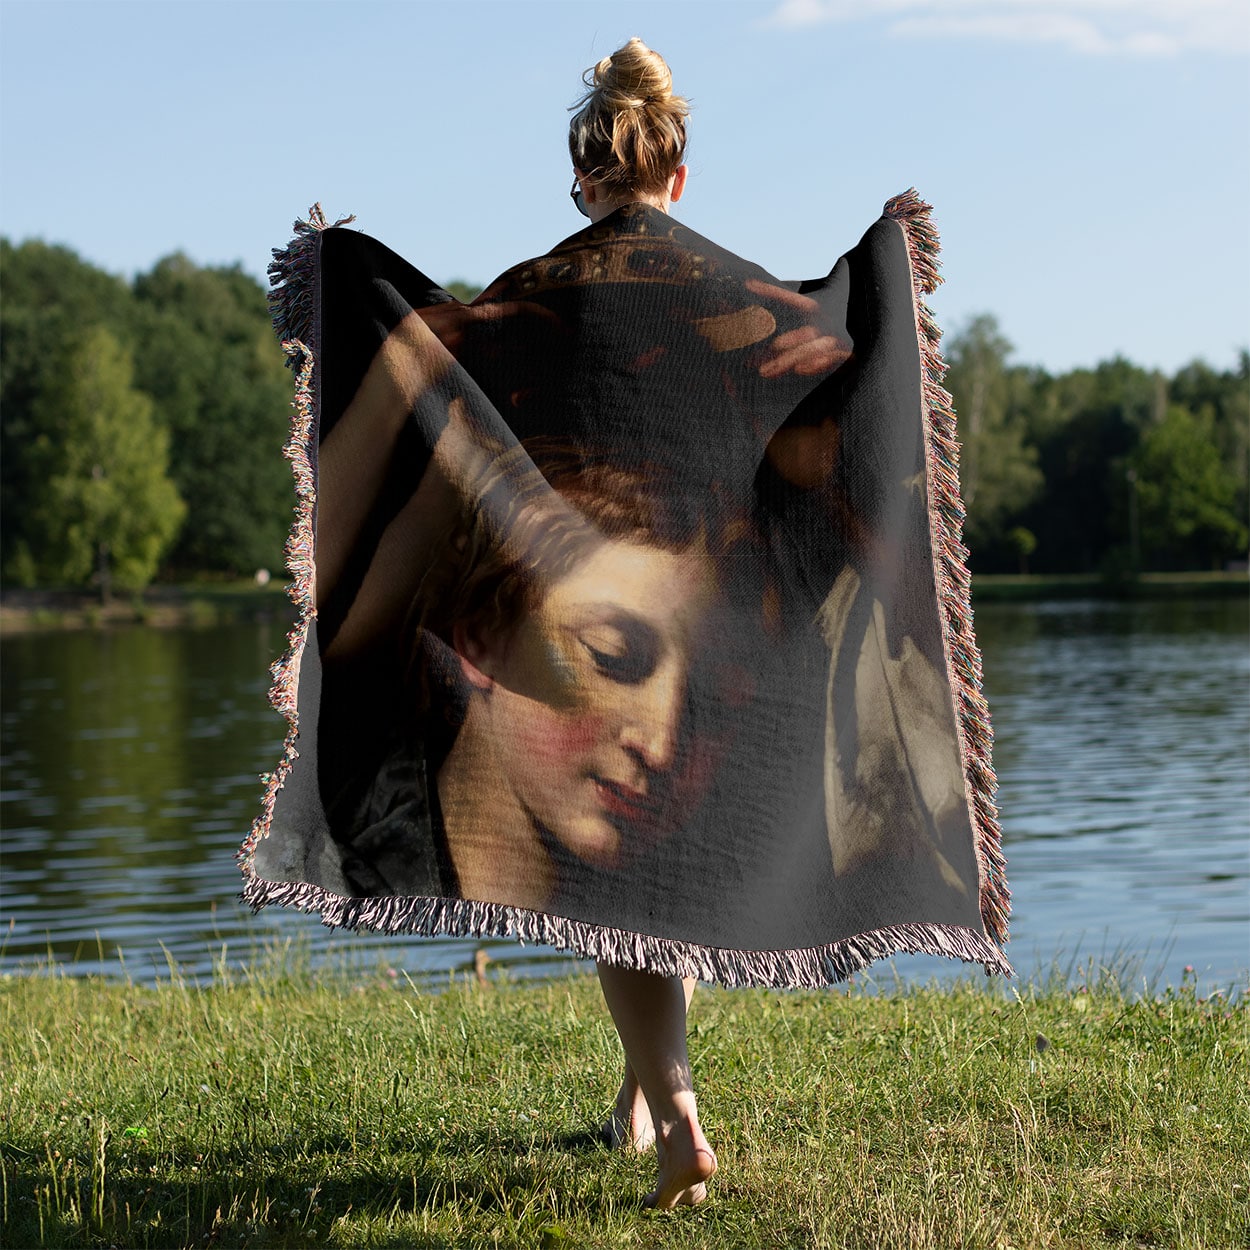 Renaissance Queen Woven Blanket Held on a Woman's Back Outside